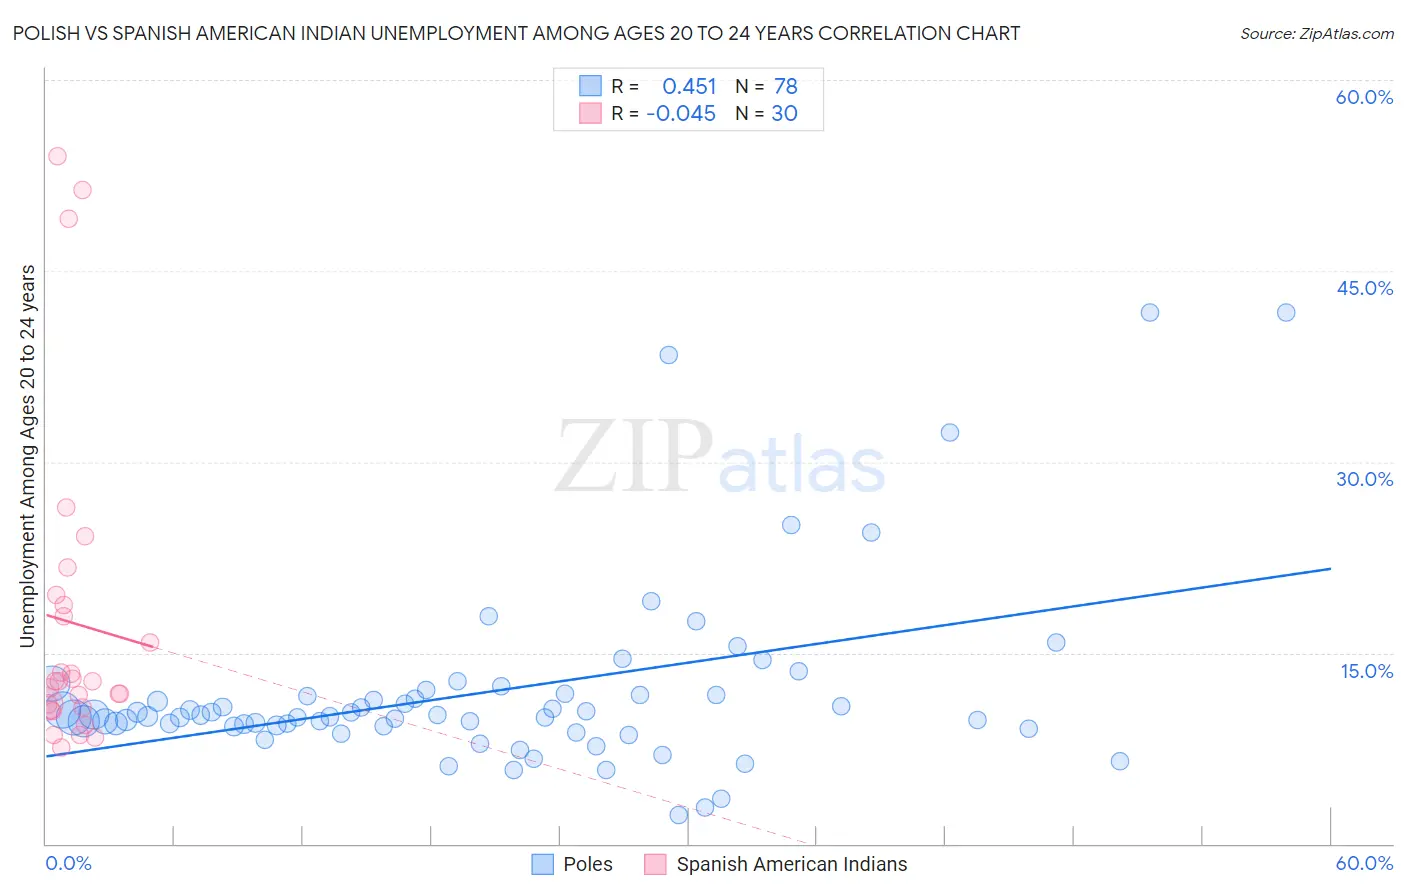 Polish vs Spanish American Indian Unemployment Among Ages 20 to 24 years